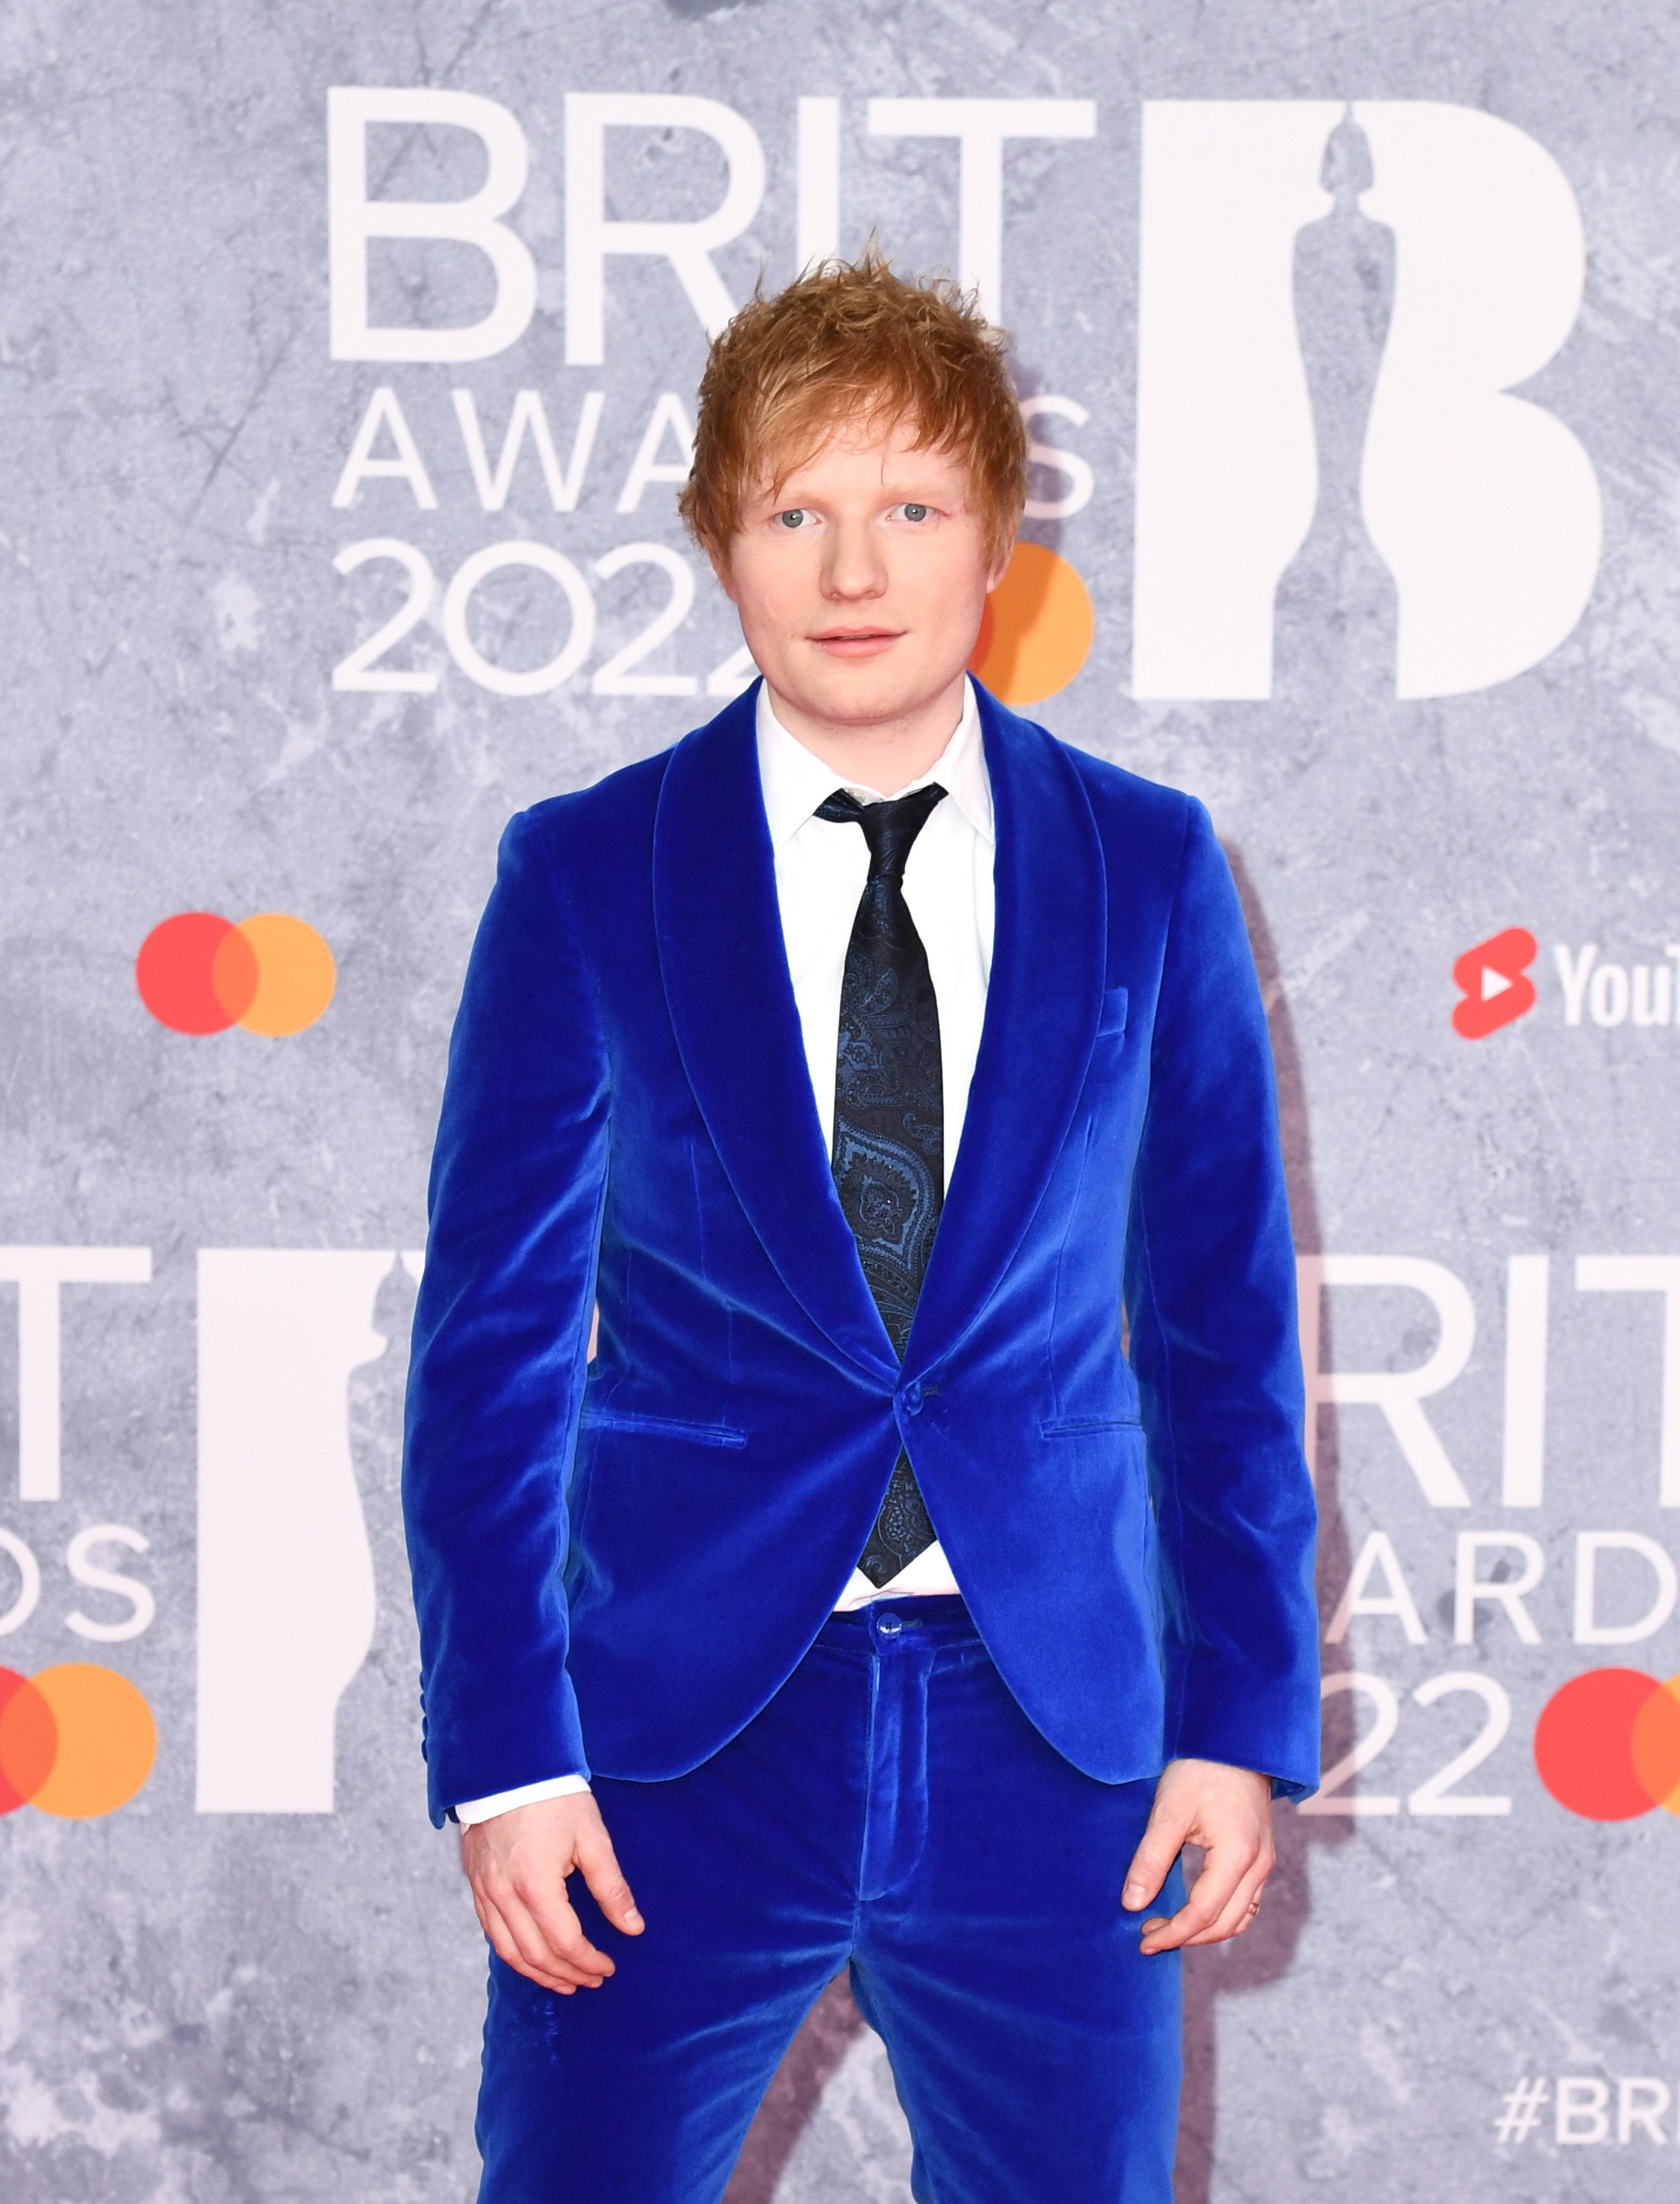 The musician, who is performing at the Brits, wore an electric blue velvet suit custom-made for him by Etro for the occasion. He paired the look with a paisley print tie,